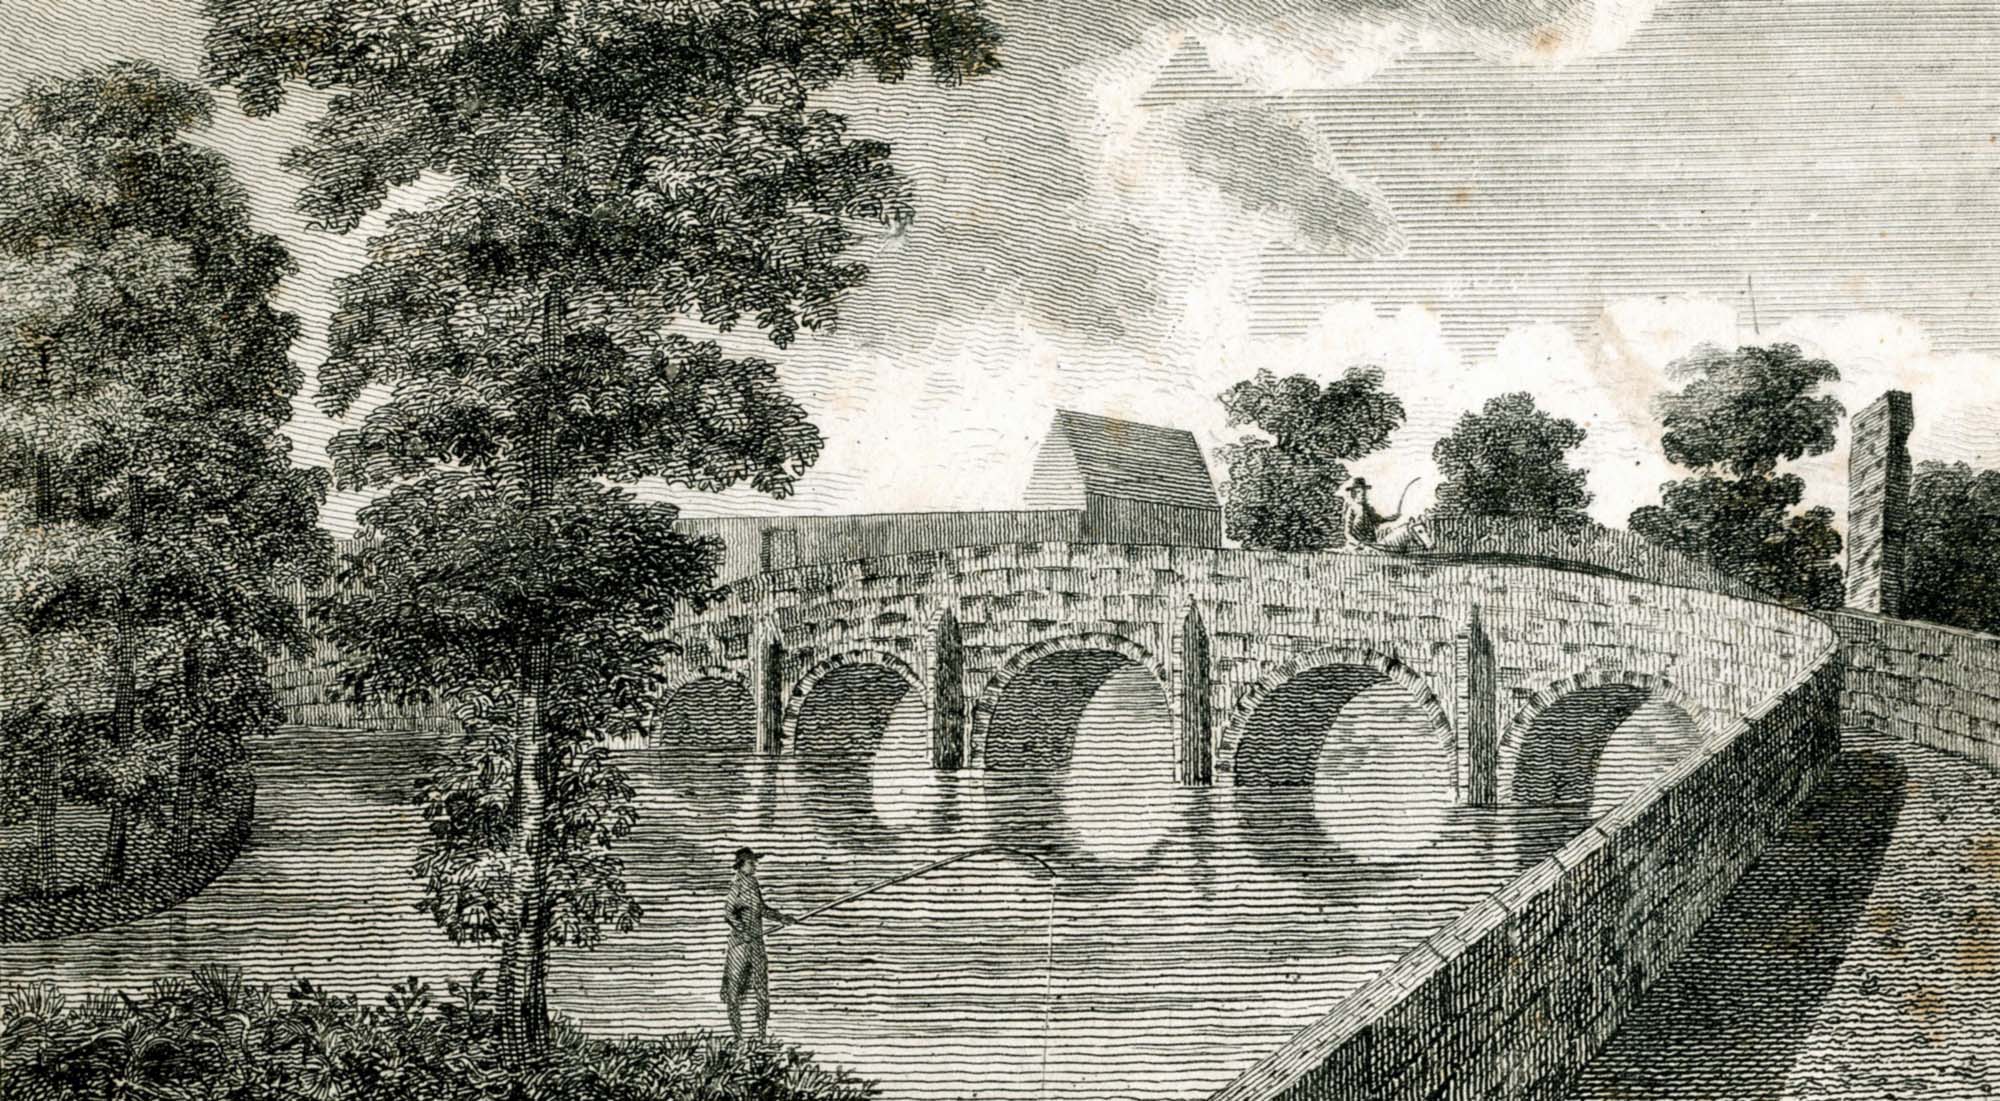 An engraving of ‘King Richard’s Bridge’ by John Throsby, 1791 - University of Leicester Library Special Collections